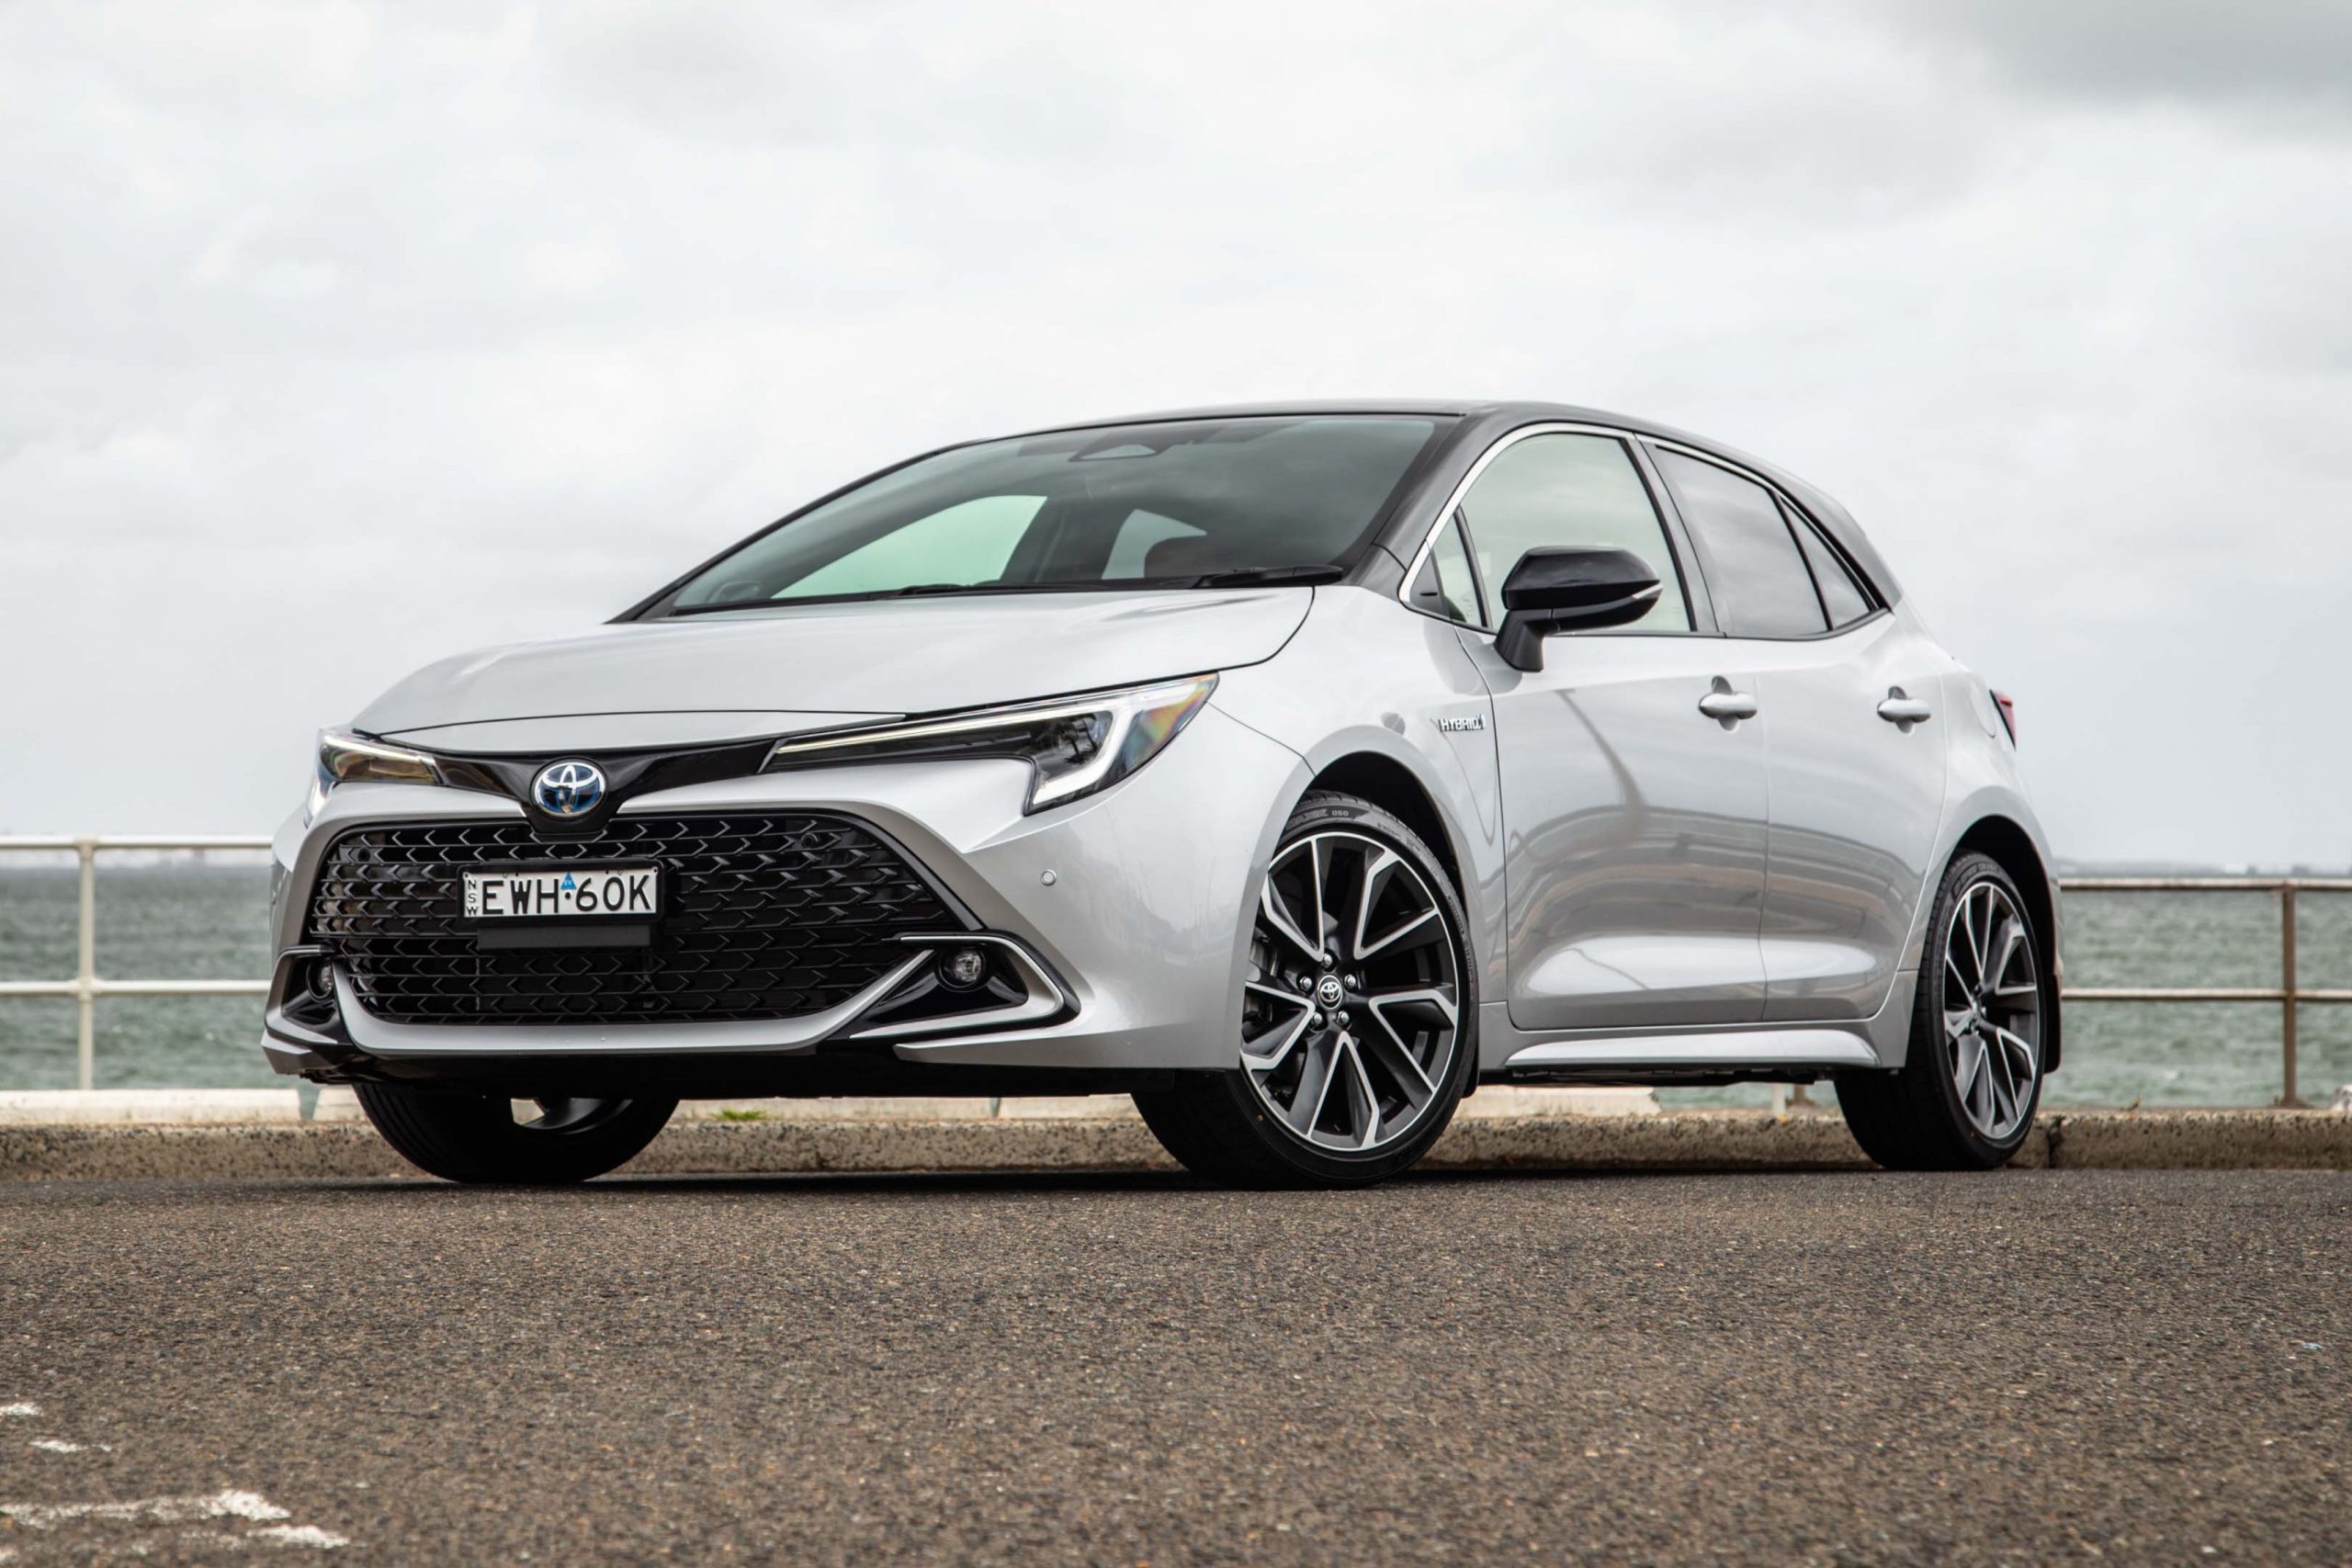 Toyota corolla: A Compact Car That Fits Your Budget